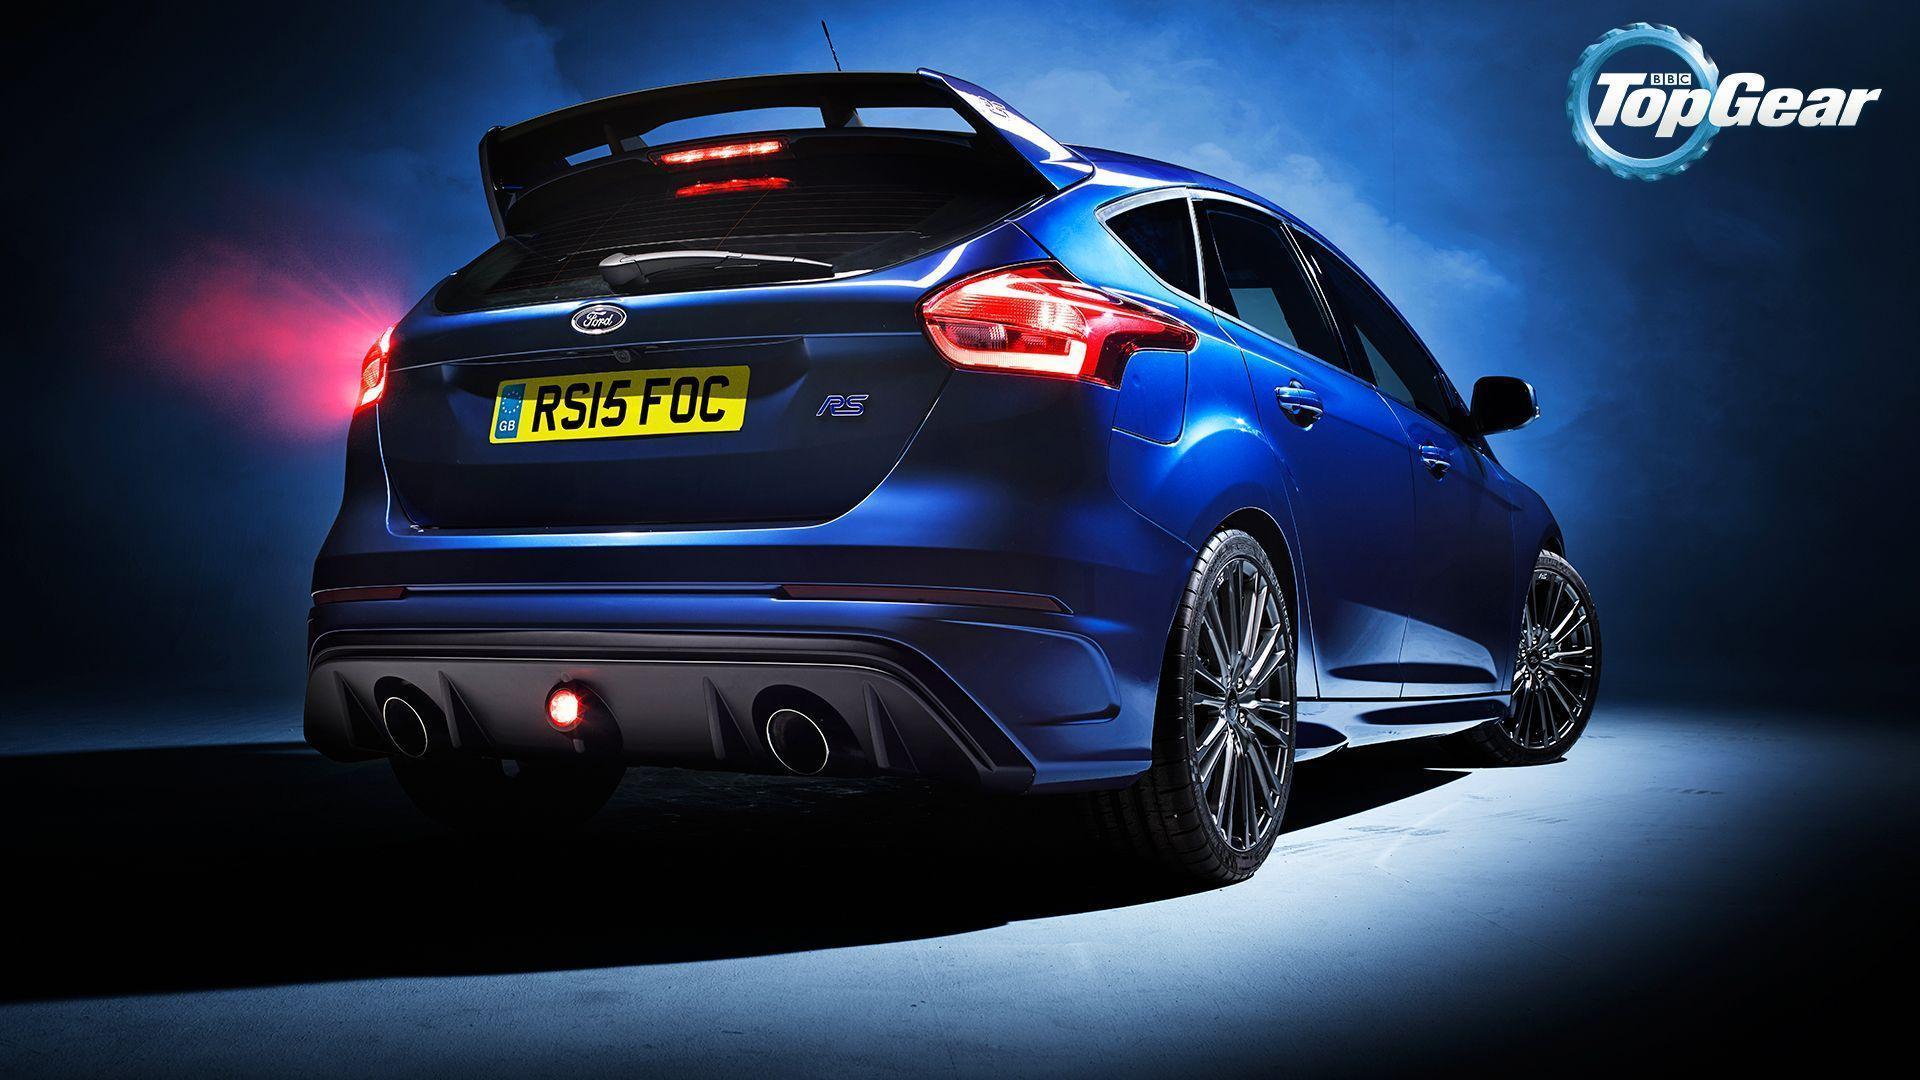 Wallpaper: the new Focus RS